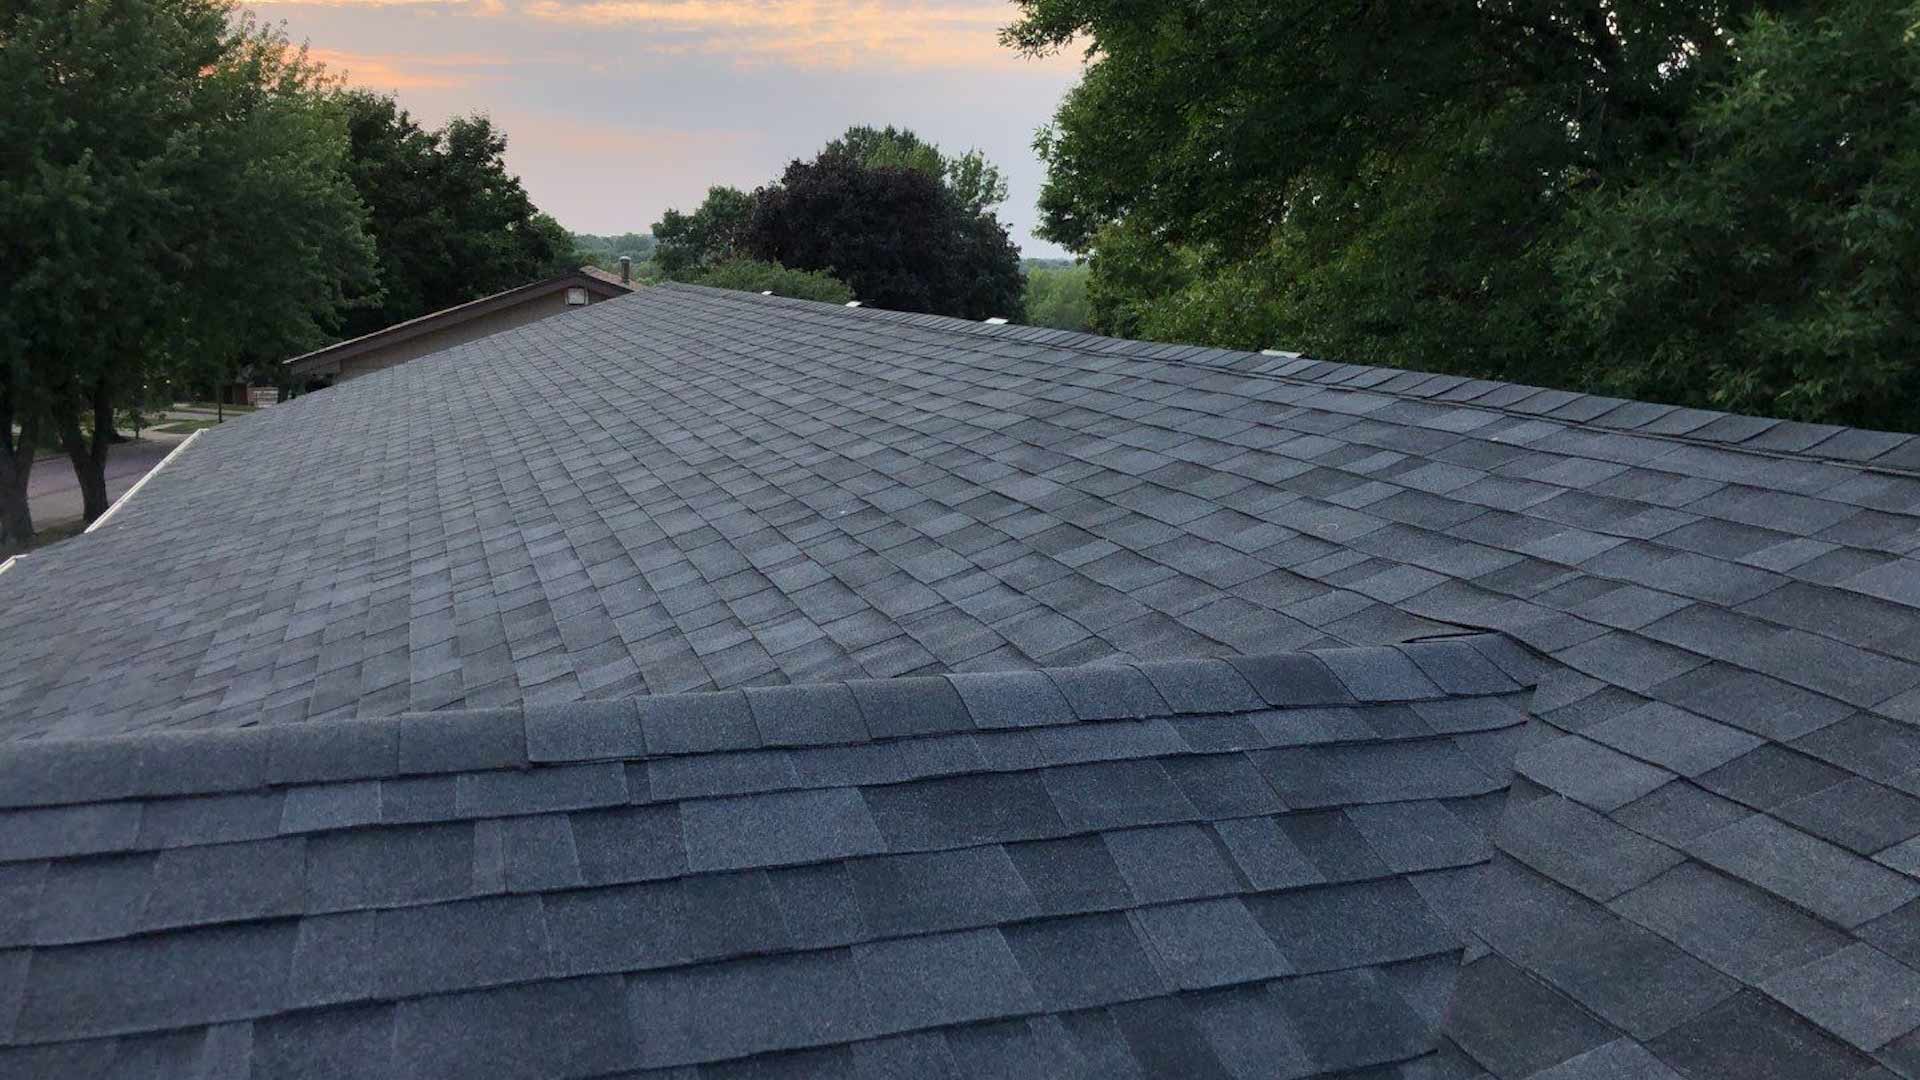 The Impact of Severe Weather on Roofing in Oklahoma City and How to Prepare